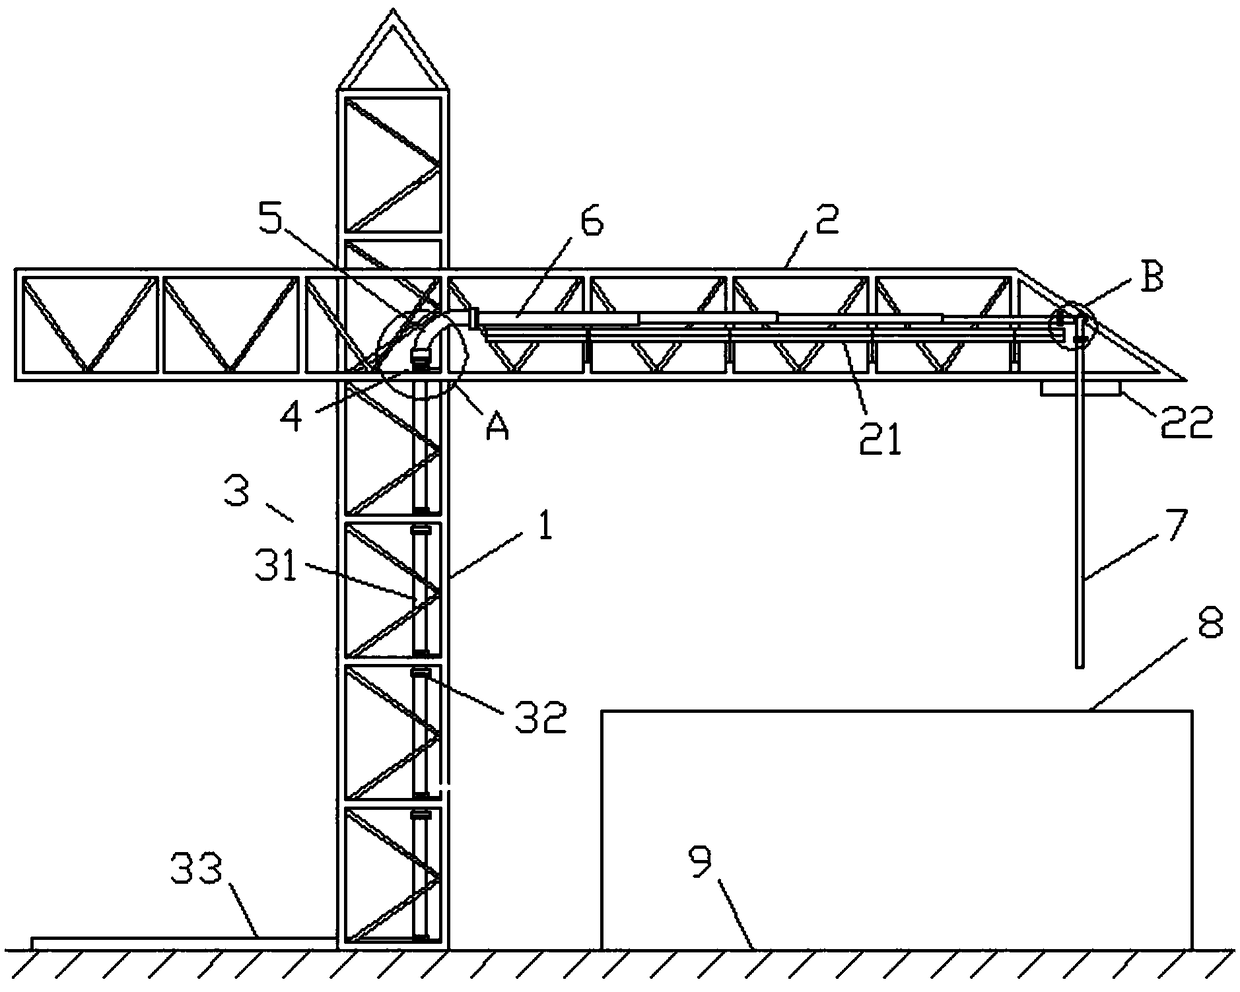 Conveying and pouring device based on concrete construction of high-rise building